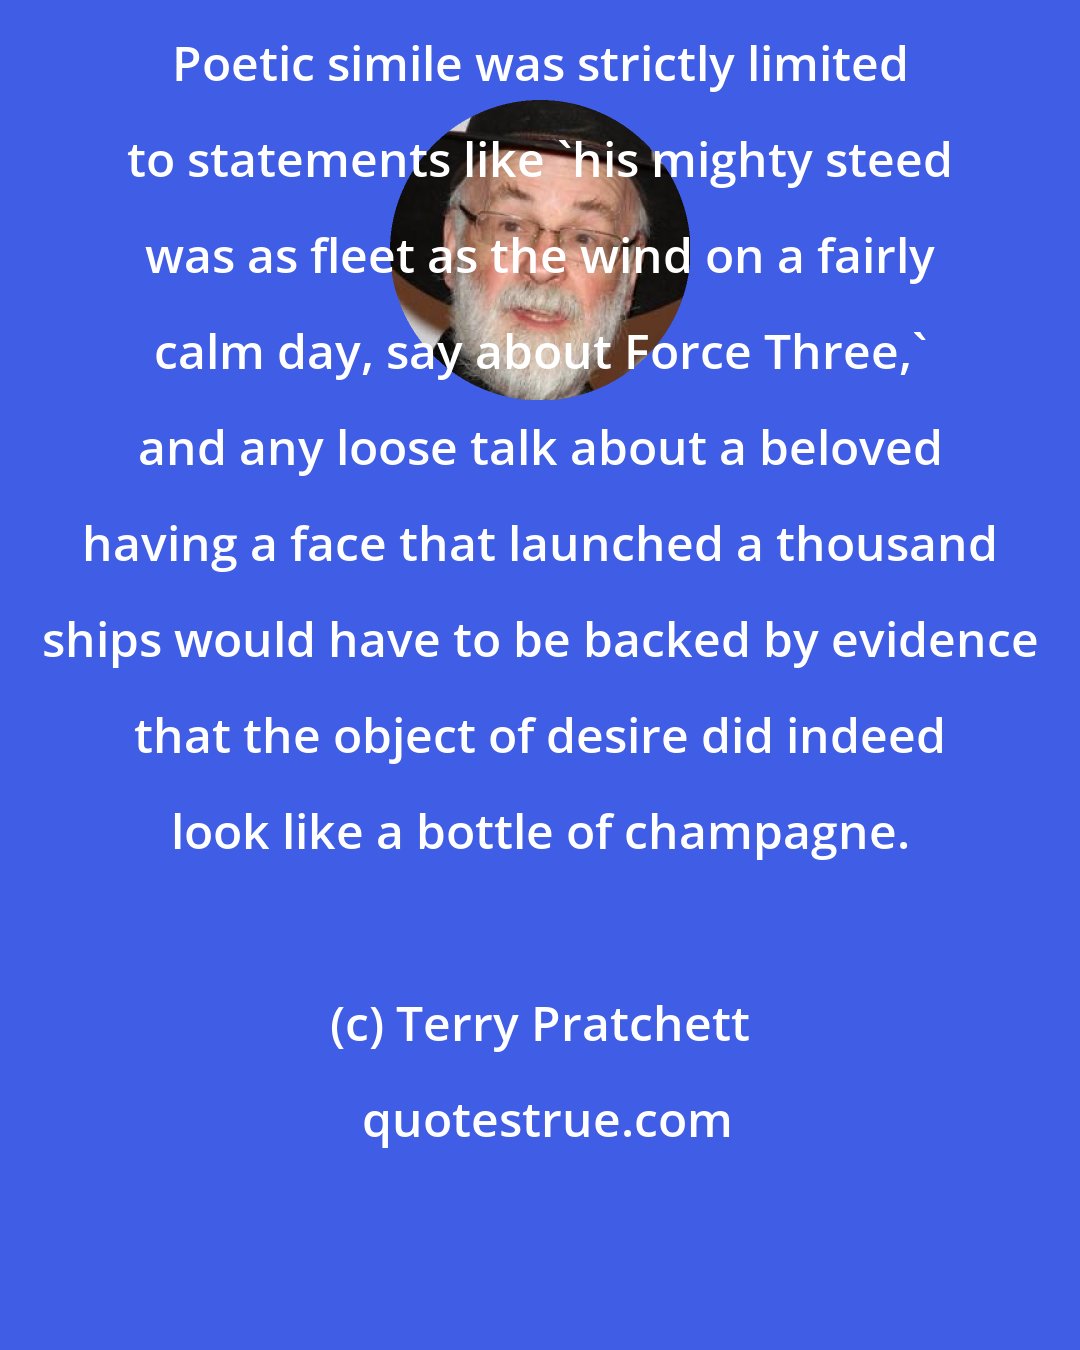 Terry Pratchett: Poetic simile was strictly limited to statements like 'his mighty steed was as fleet as the wind on a fairly calm day, say about Force Three,' and any loose talk about a beloved having a face that launched a thousand ships would have to be backed by evidence that the object of desire did indeed look like a bottle of champagne.